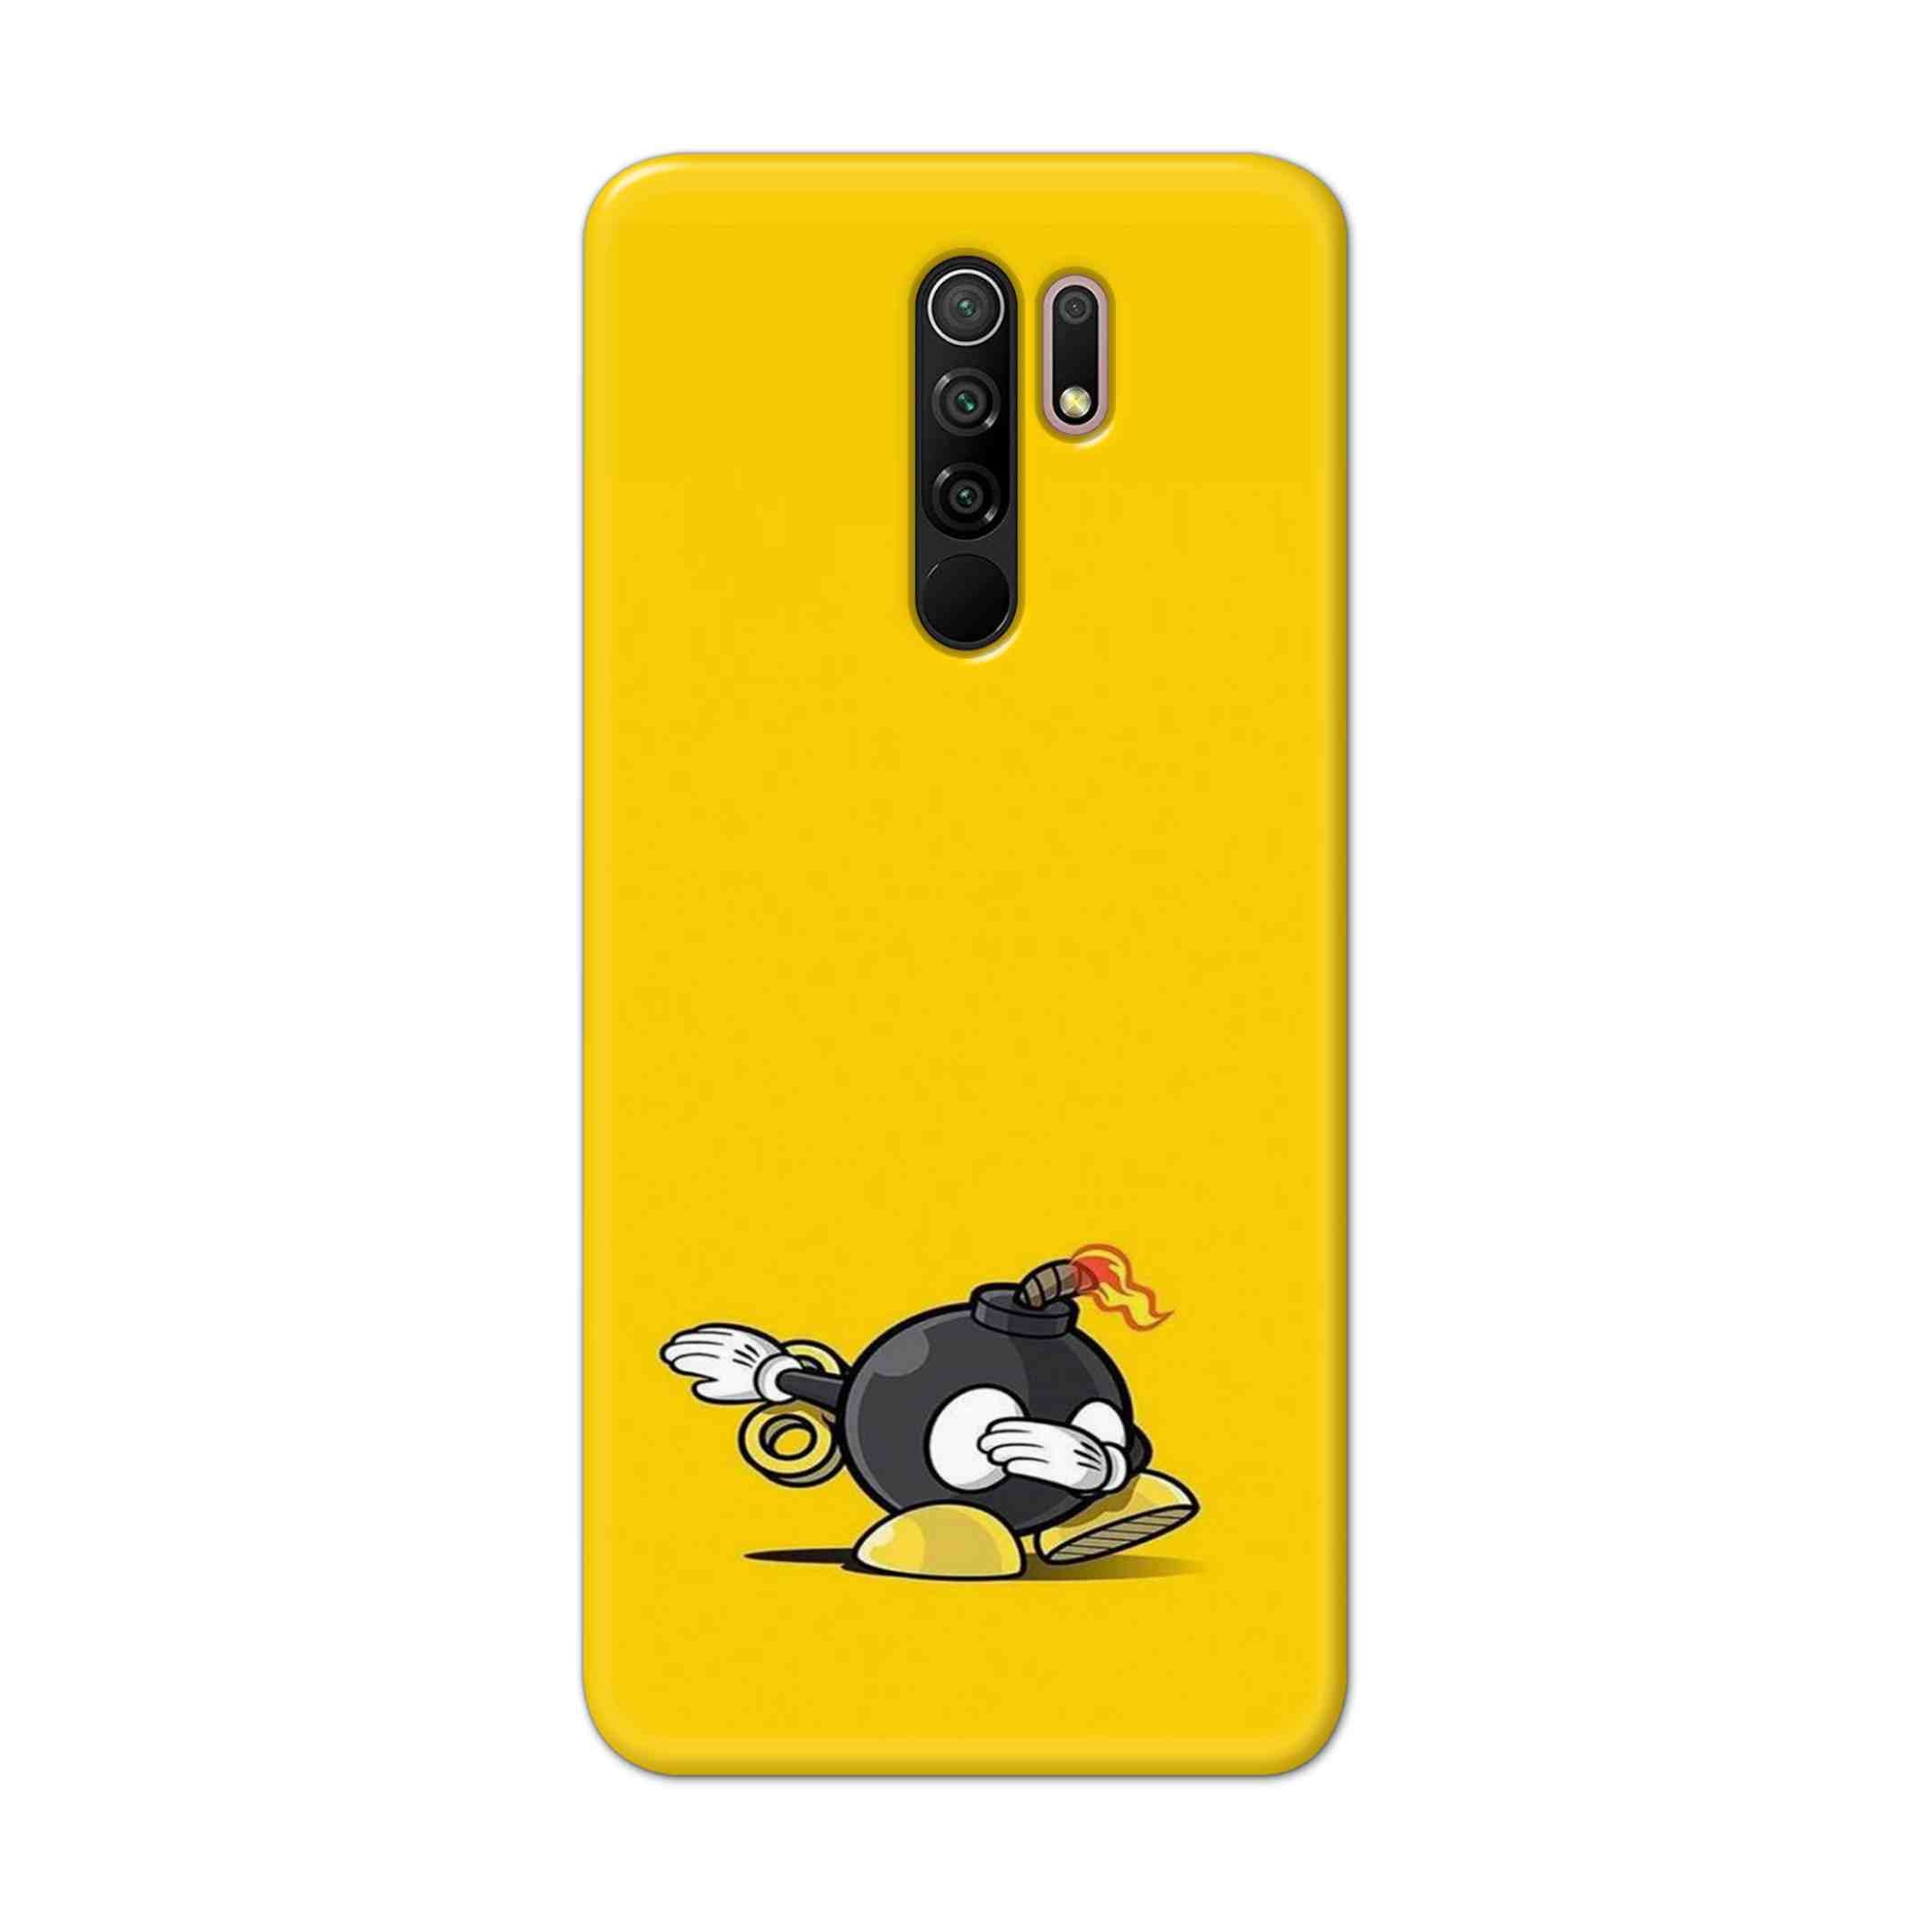 Buy Dashing Bomb Hard Back Mobile Phone Case Cover For Xiaomi Redmi 9 Prime Online